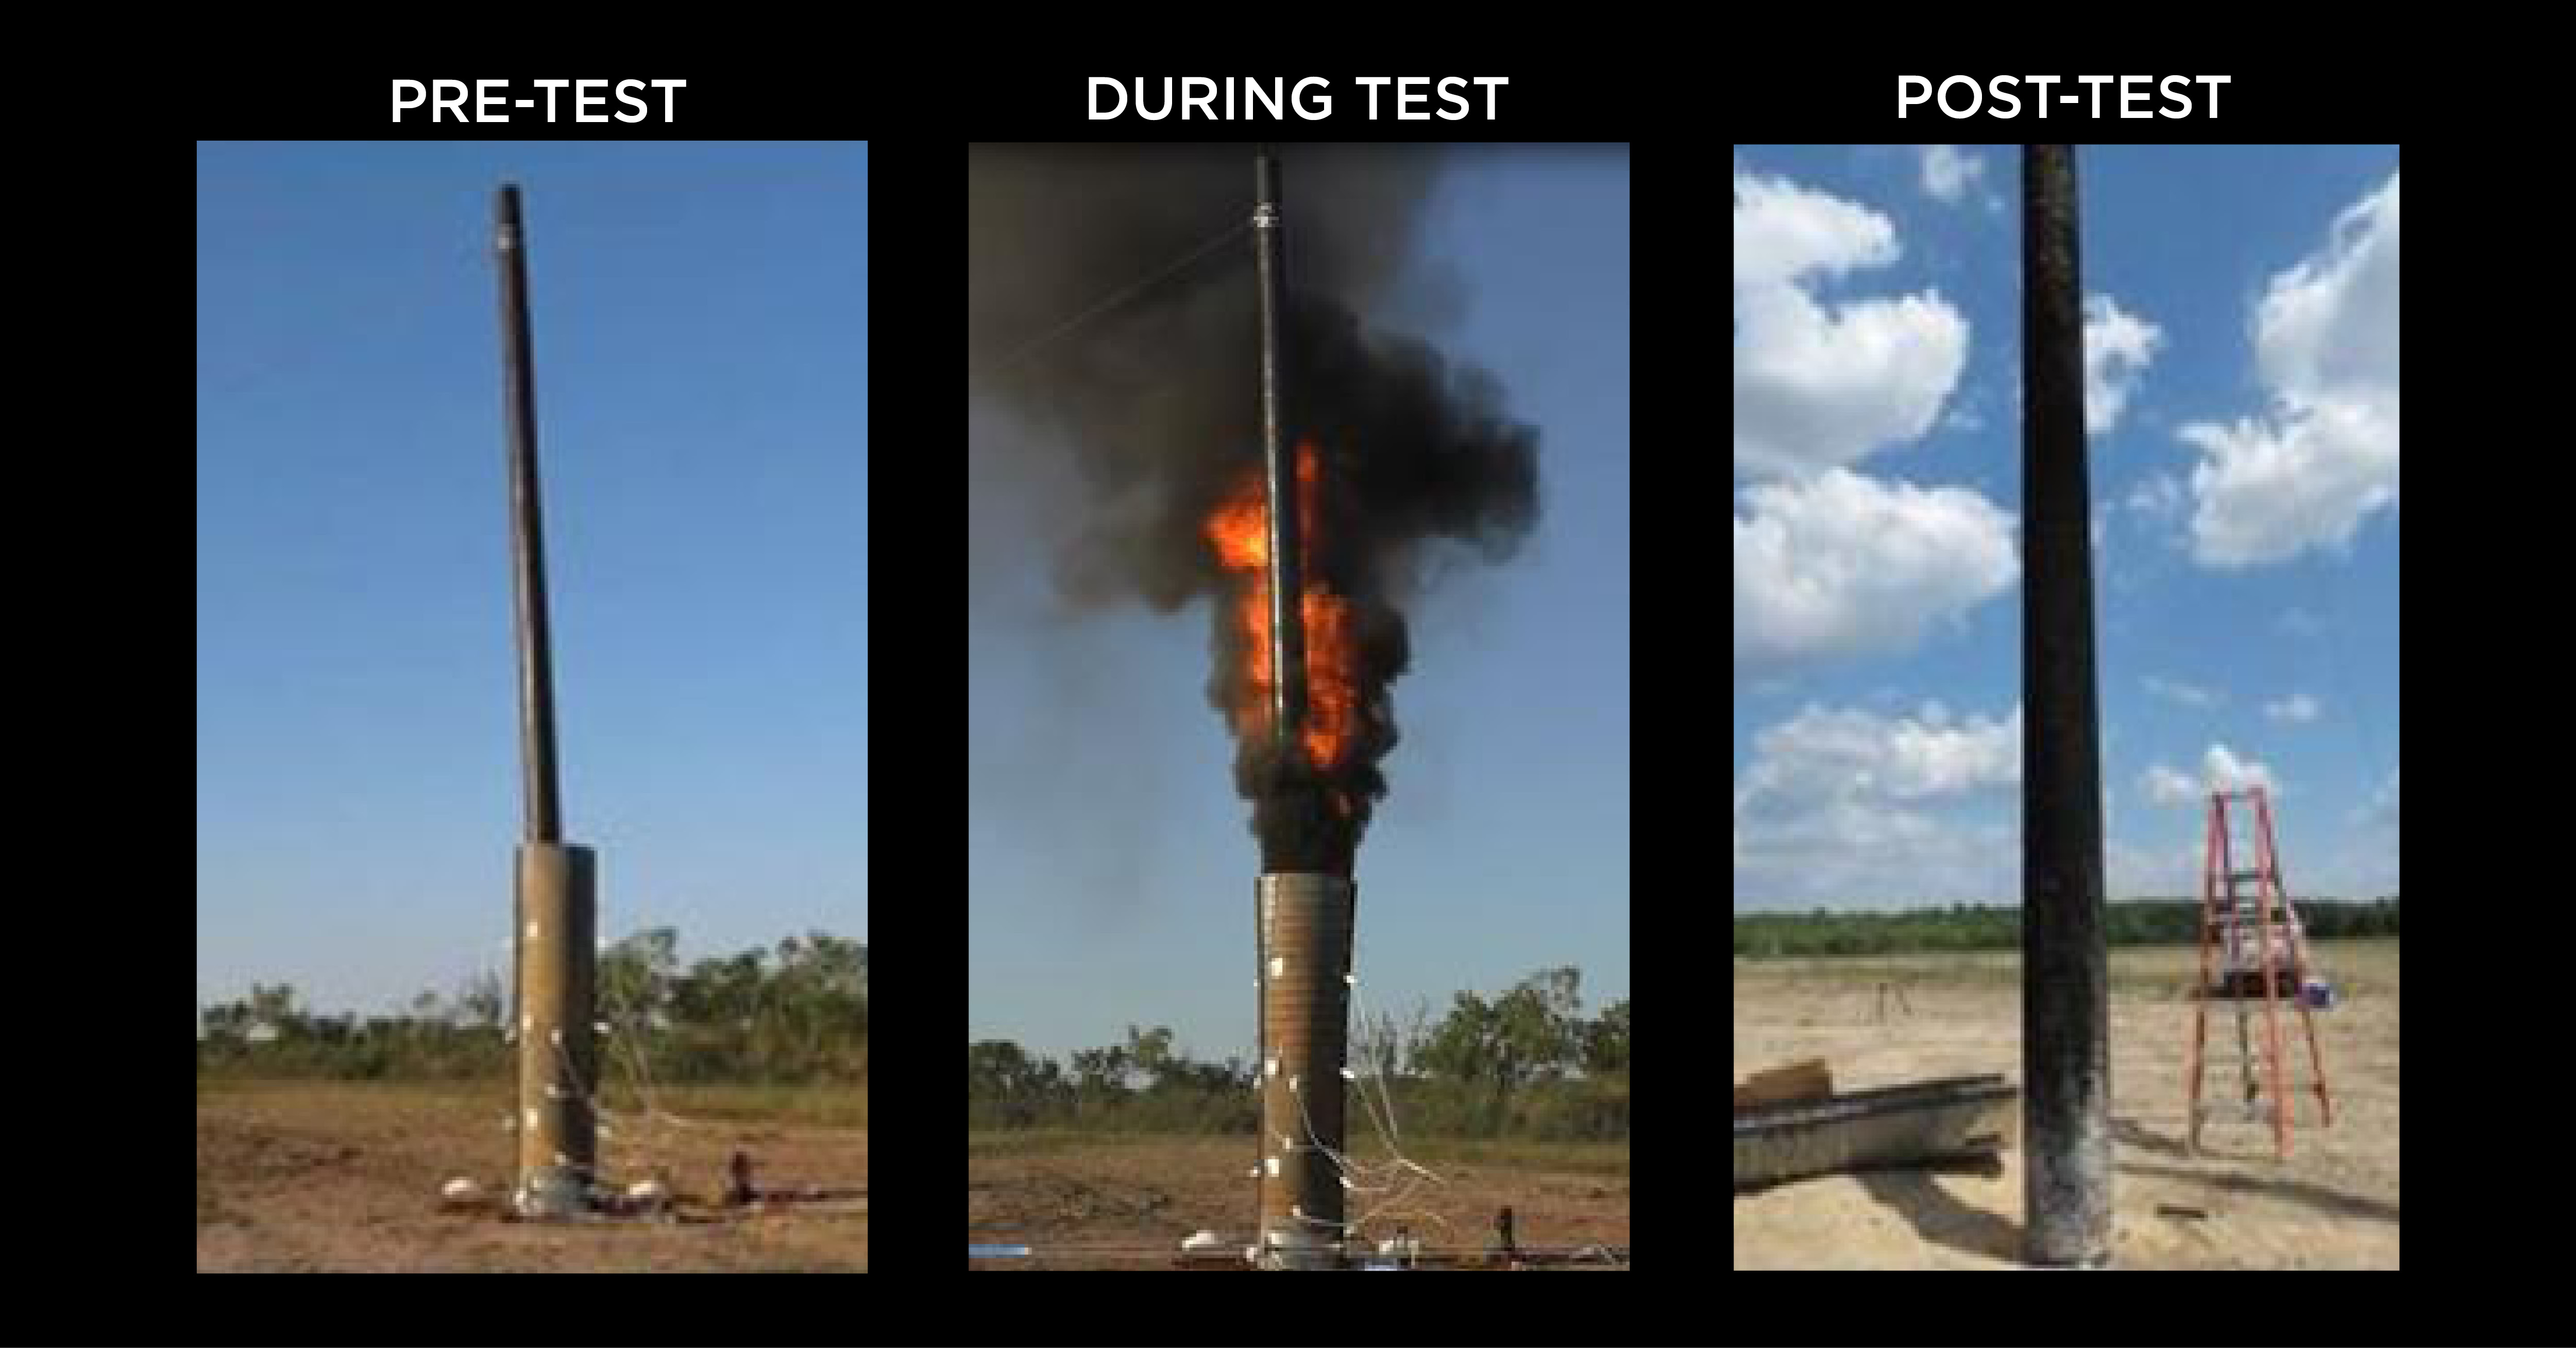 The material withstood a wildfire test whereby the utility pole is enclosed within a steel culvert and subjected to 1150°C/2100°F for 2 and 3 minutes respectively.